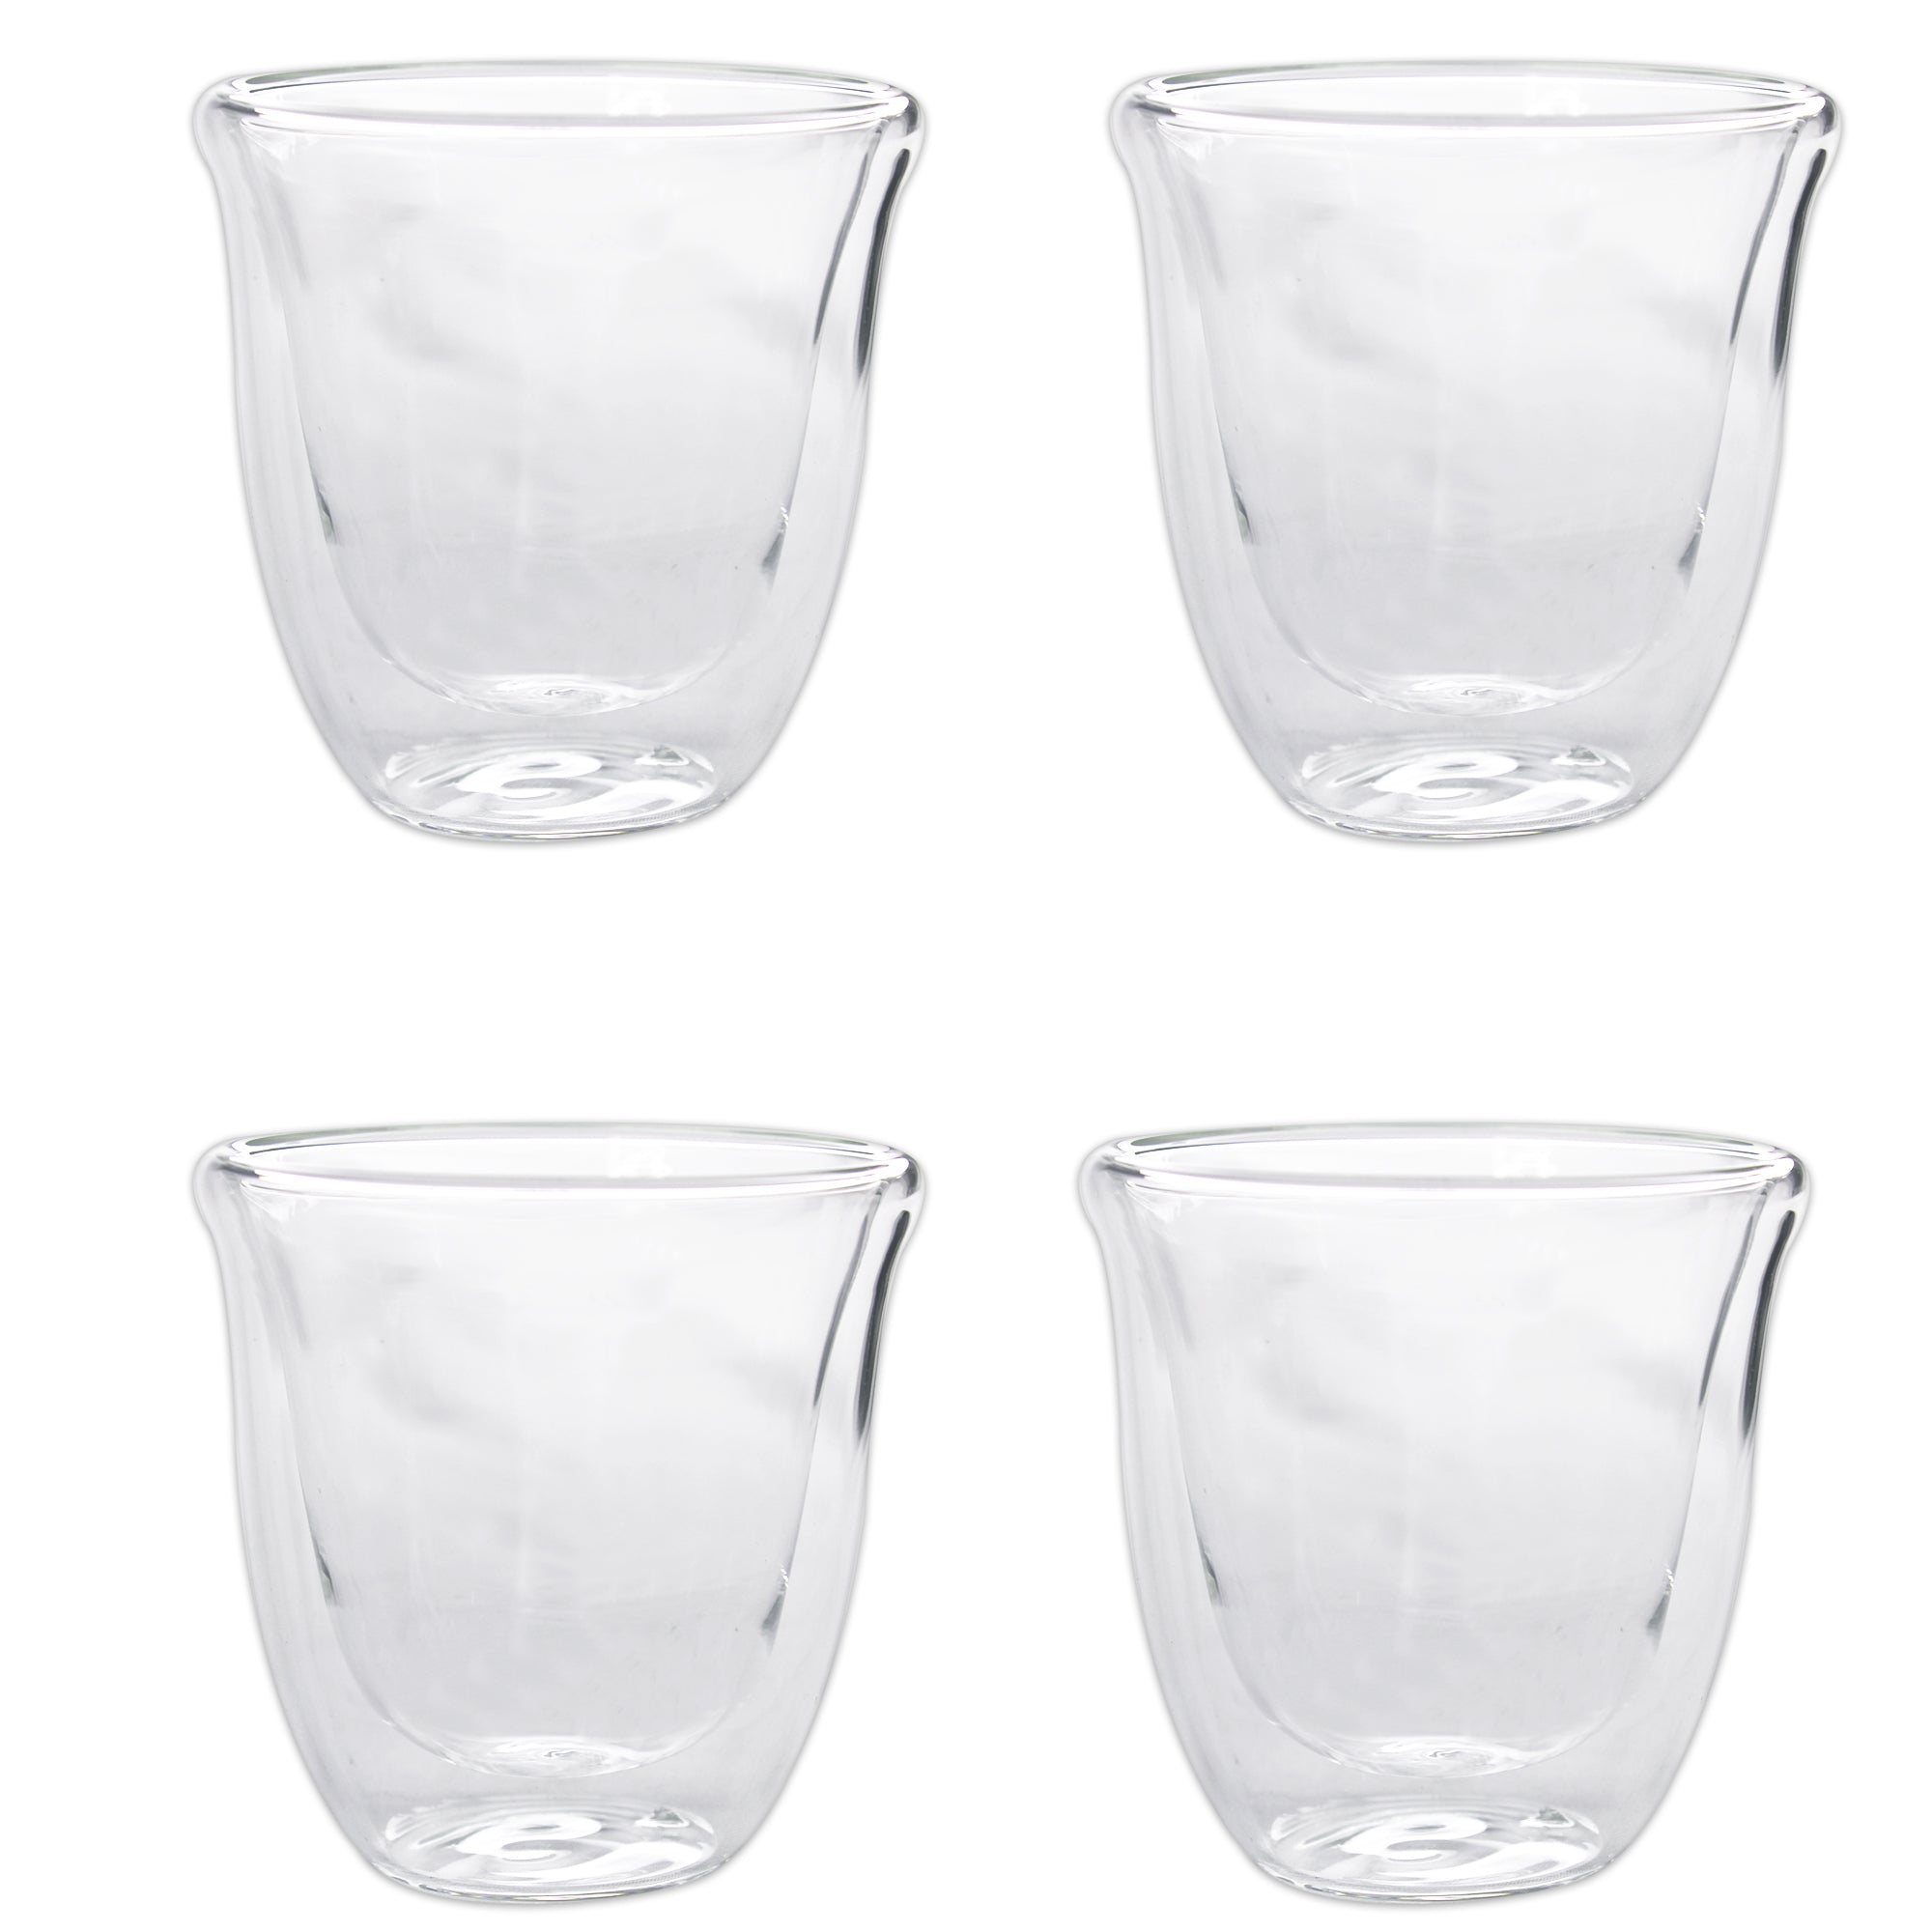 LMA Double-Wall Hot and Cold Beverage Cappuccino Cups - Set of 4 - 240ml